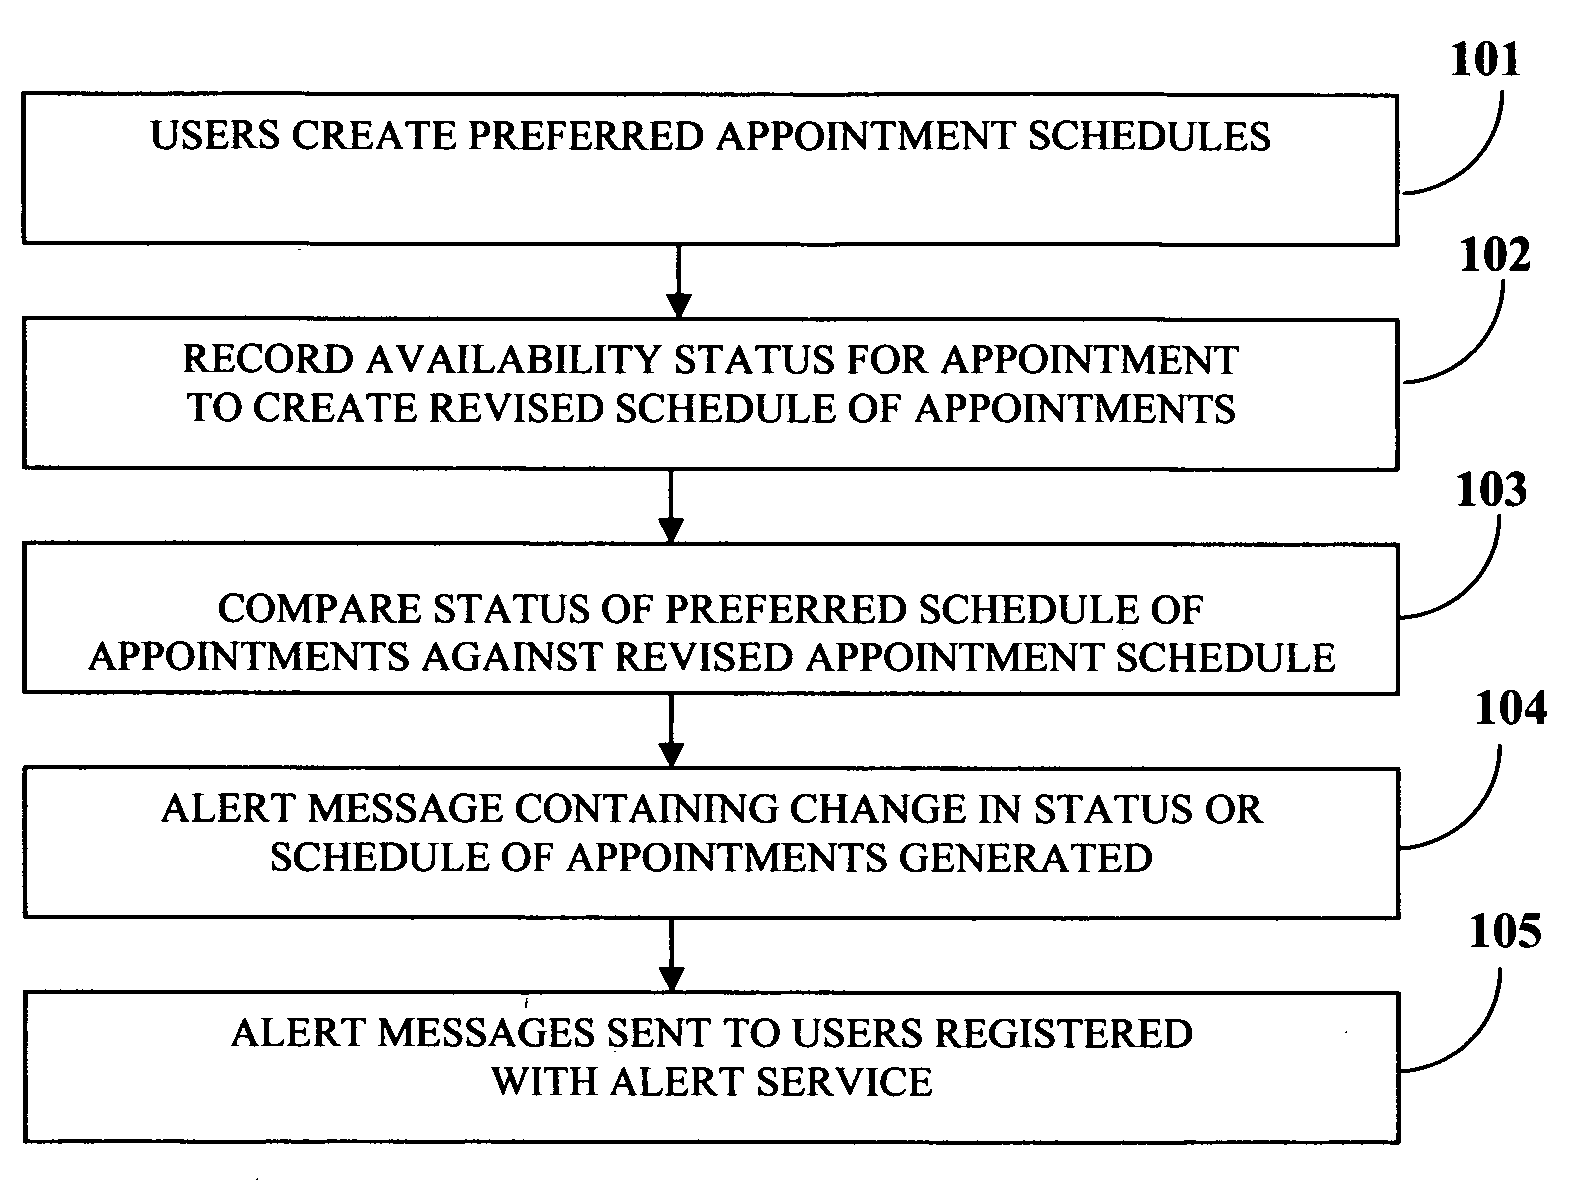 Appointment scheduling system